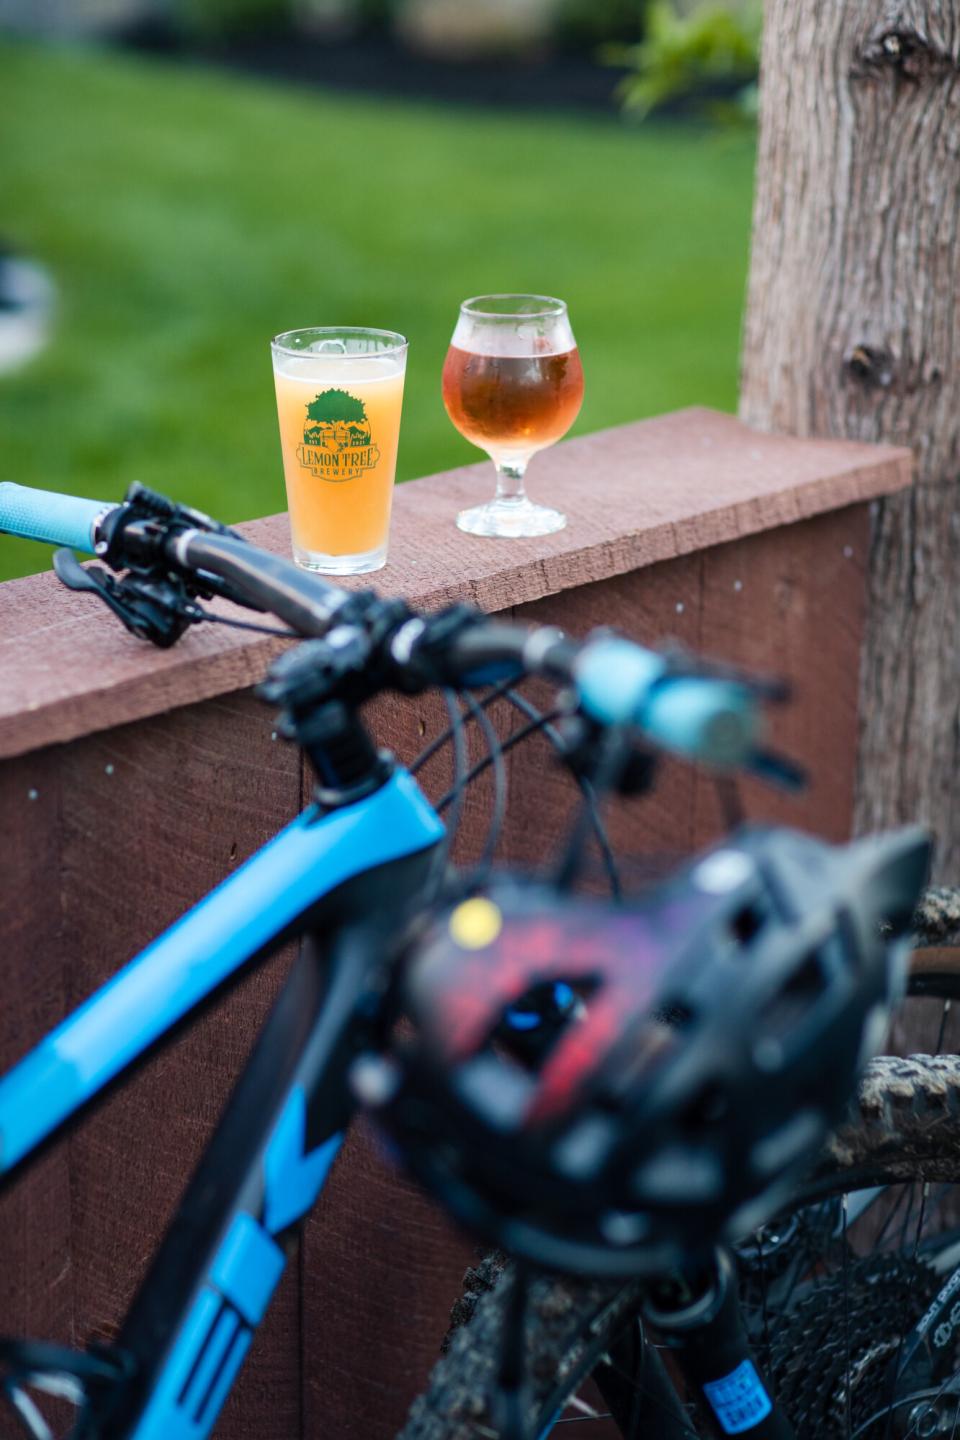 Two glasses of beer rest on a wooden wall as a mountain bike leans against it.